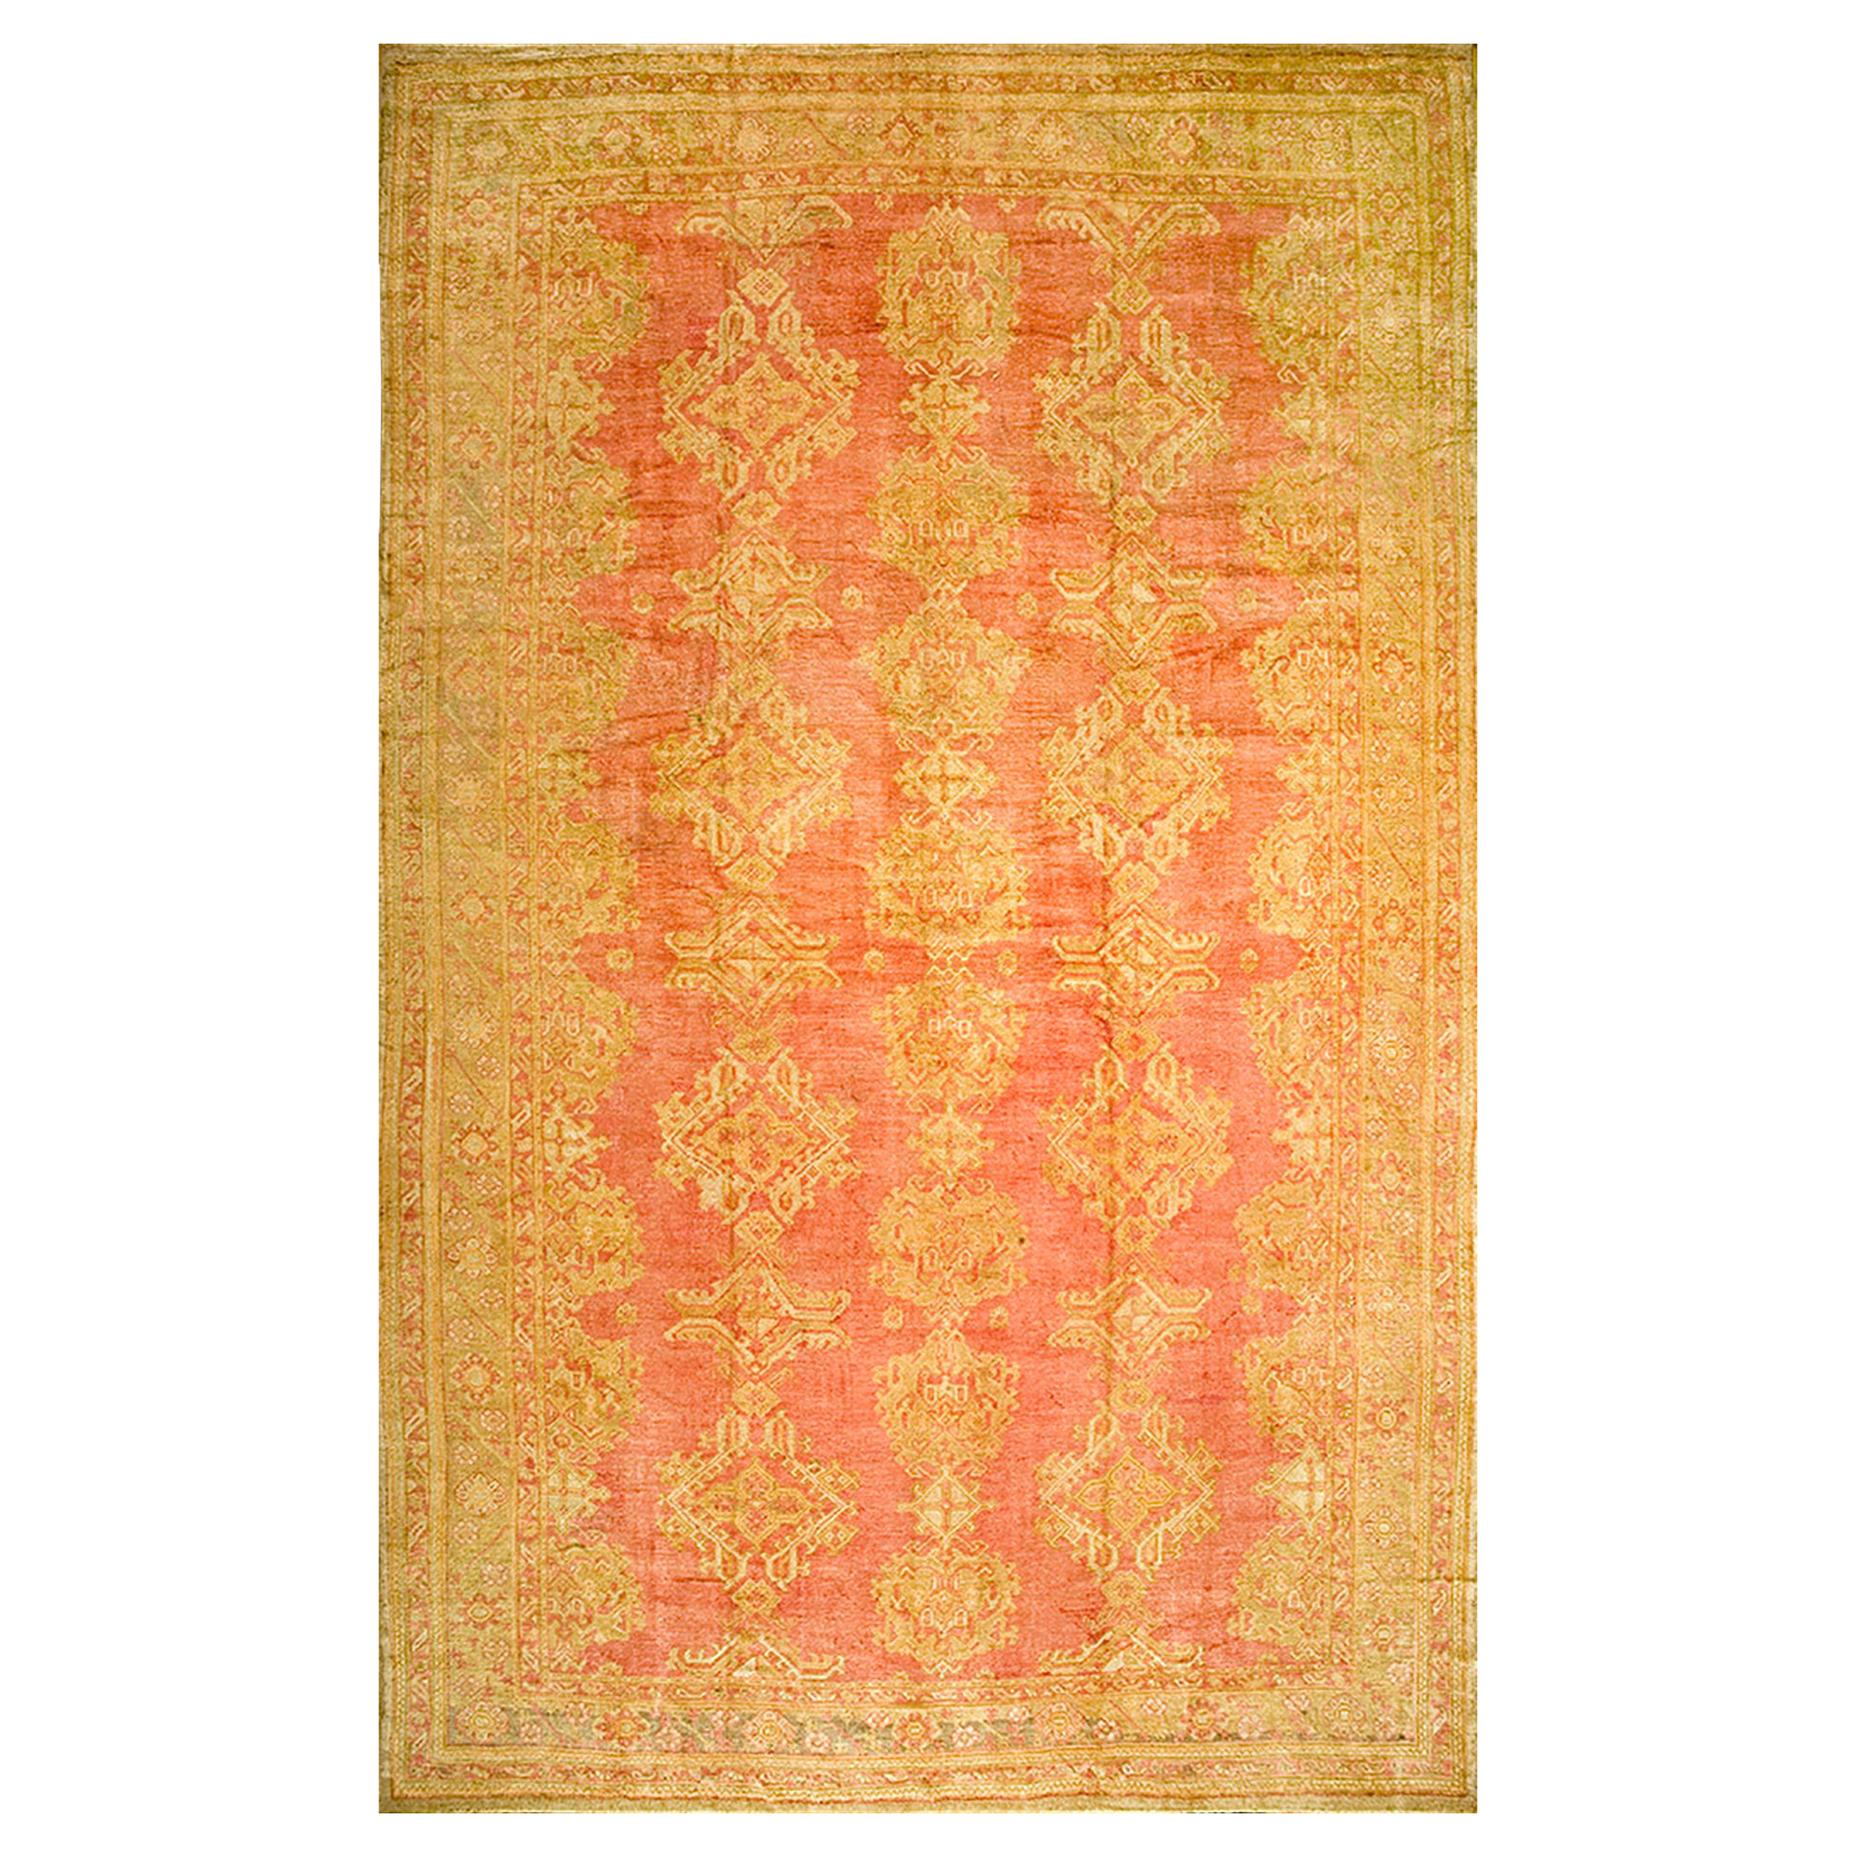 Early 20th Century Turkish Oushak Carpet ( 13'2" x 21'2" - 402 x 645 ) For Sale